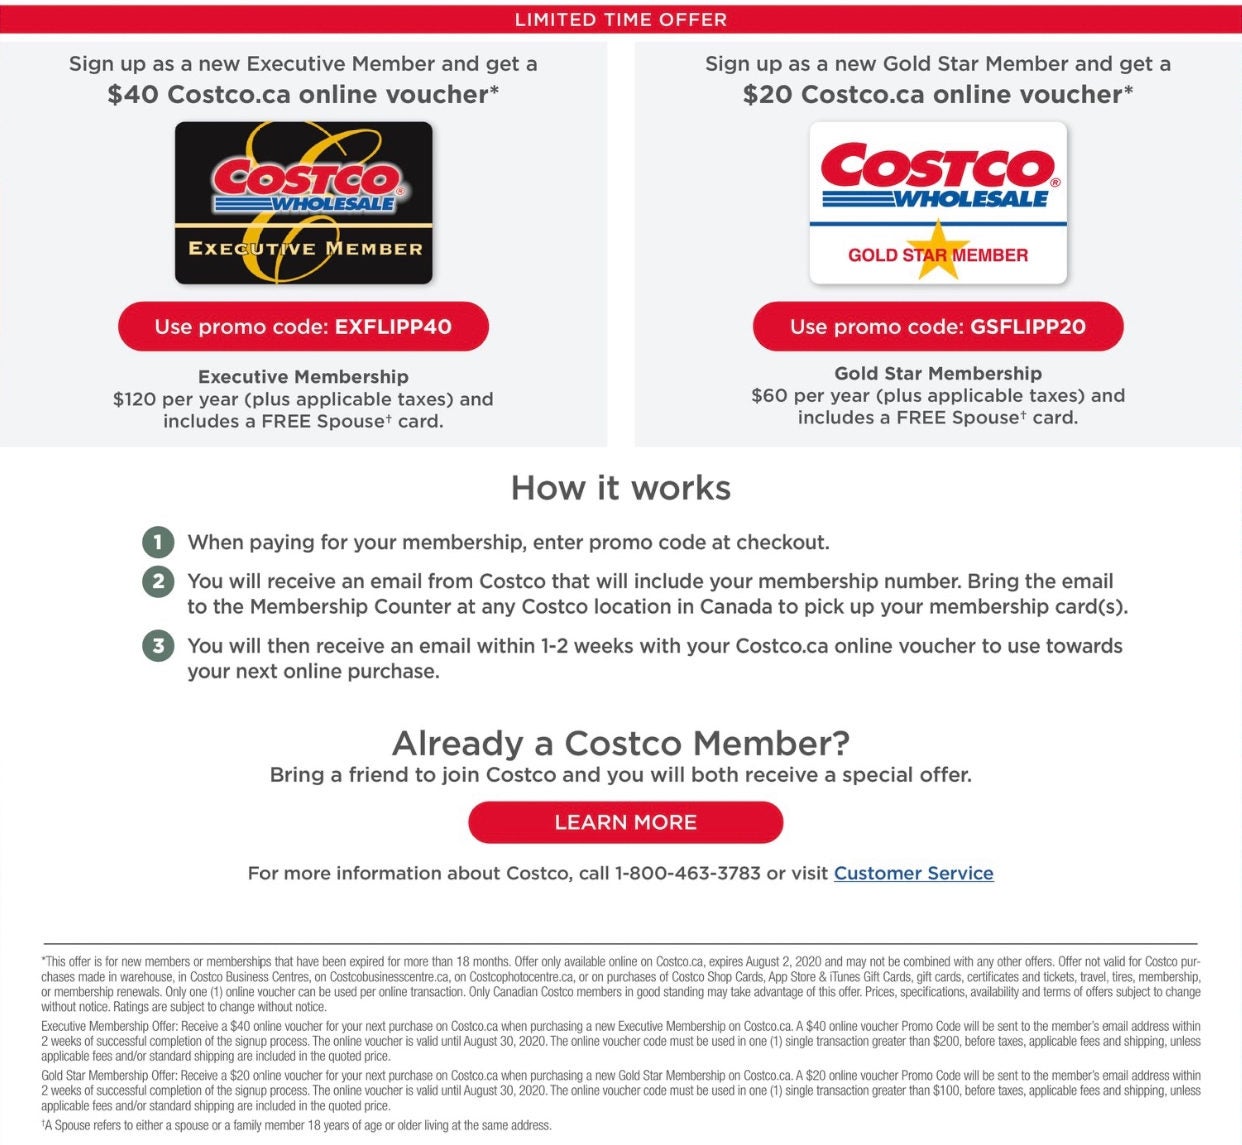 sign-up-for-60-costco-membership-get-80-in-value-back-redflagdeals